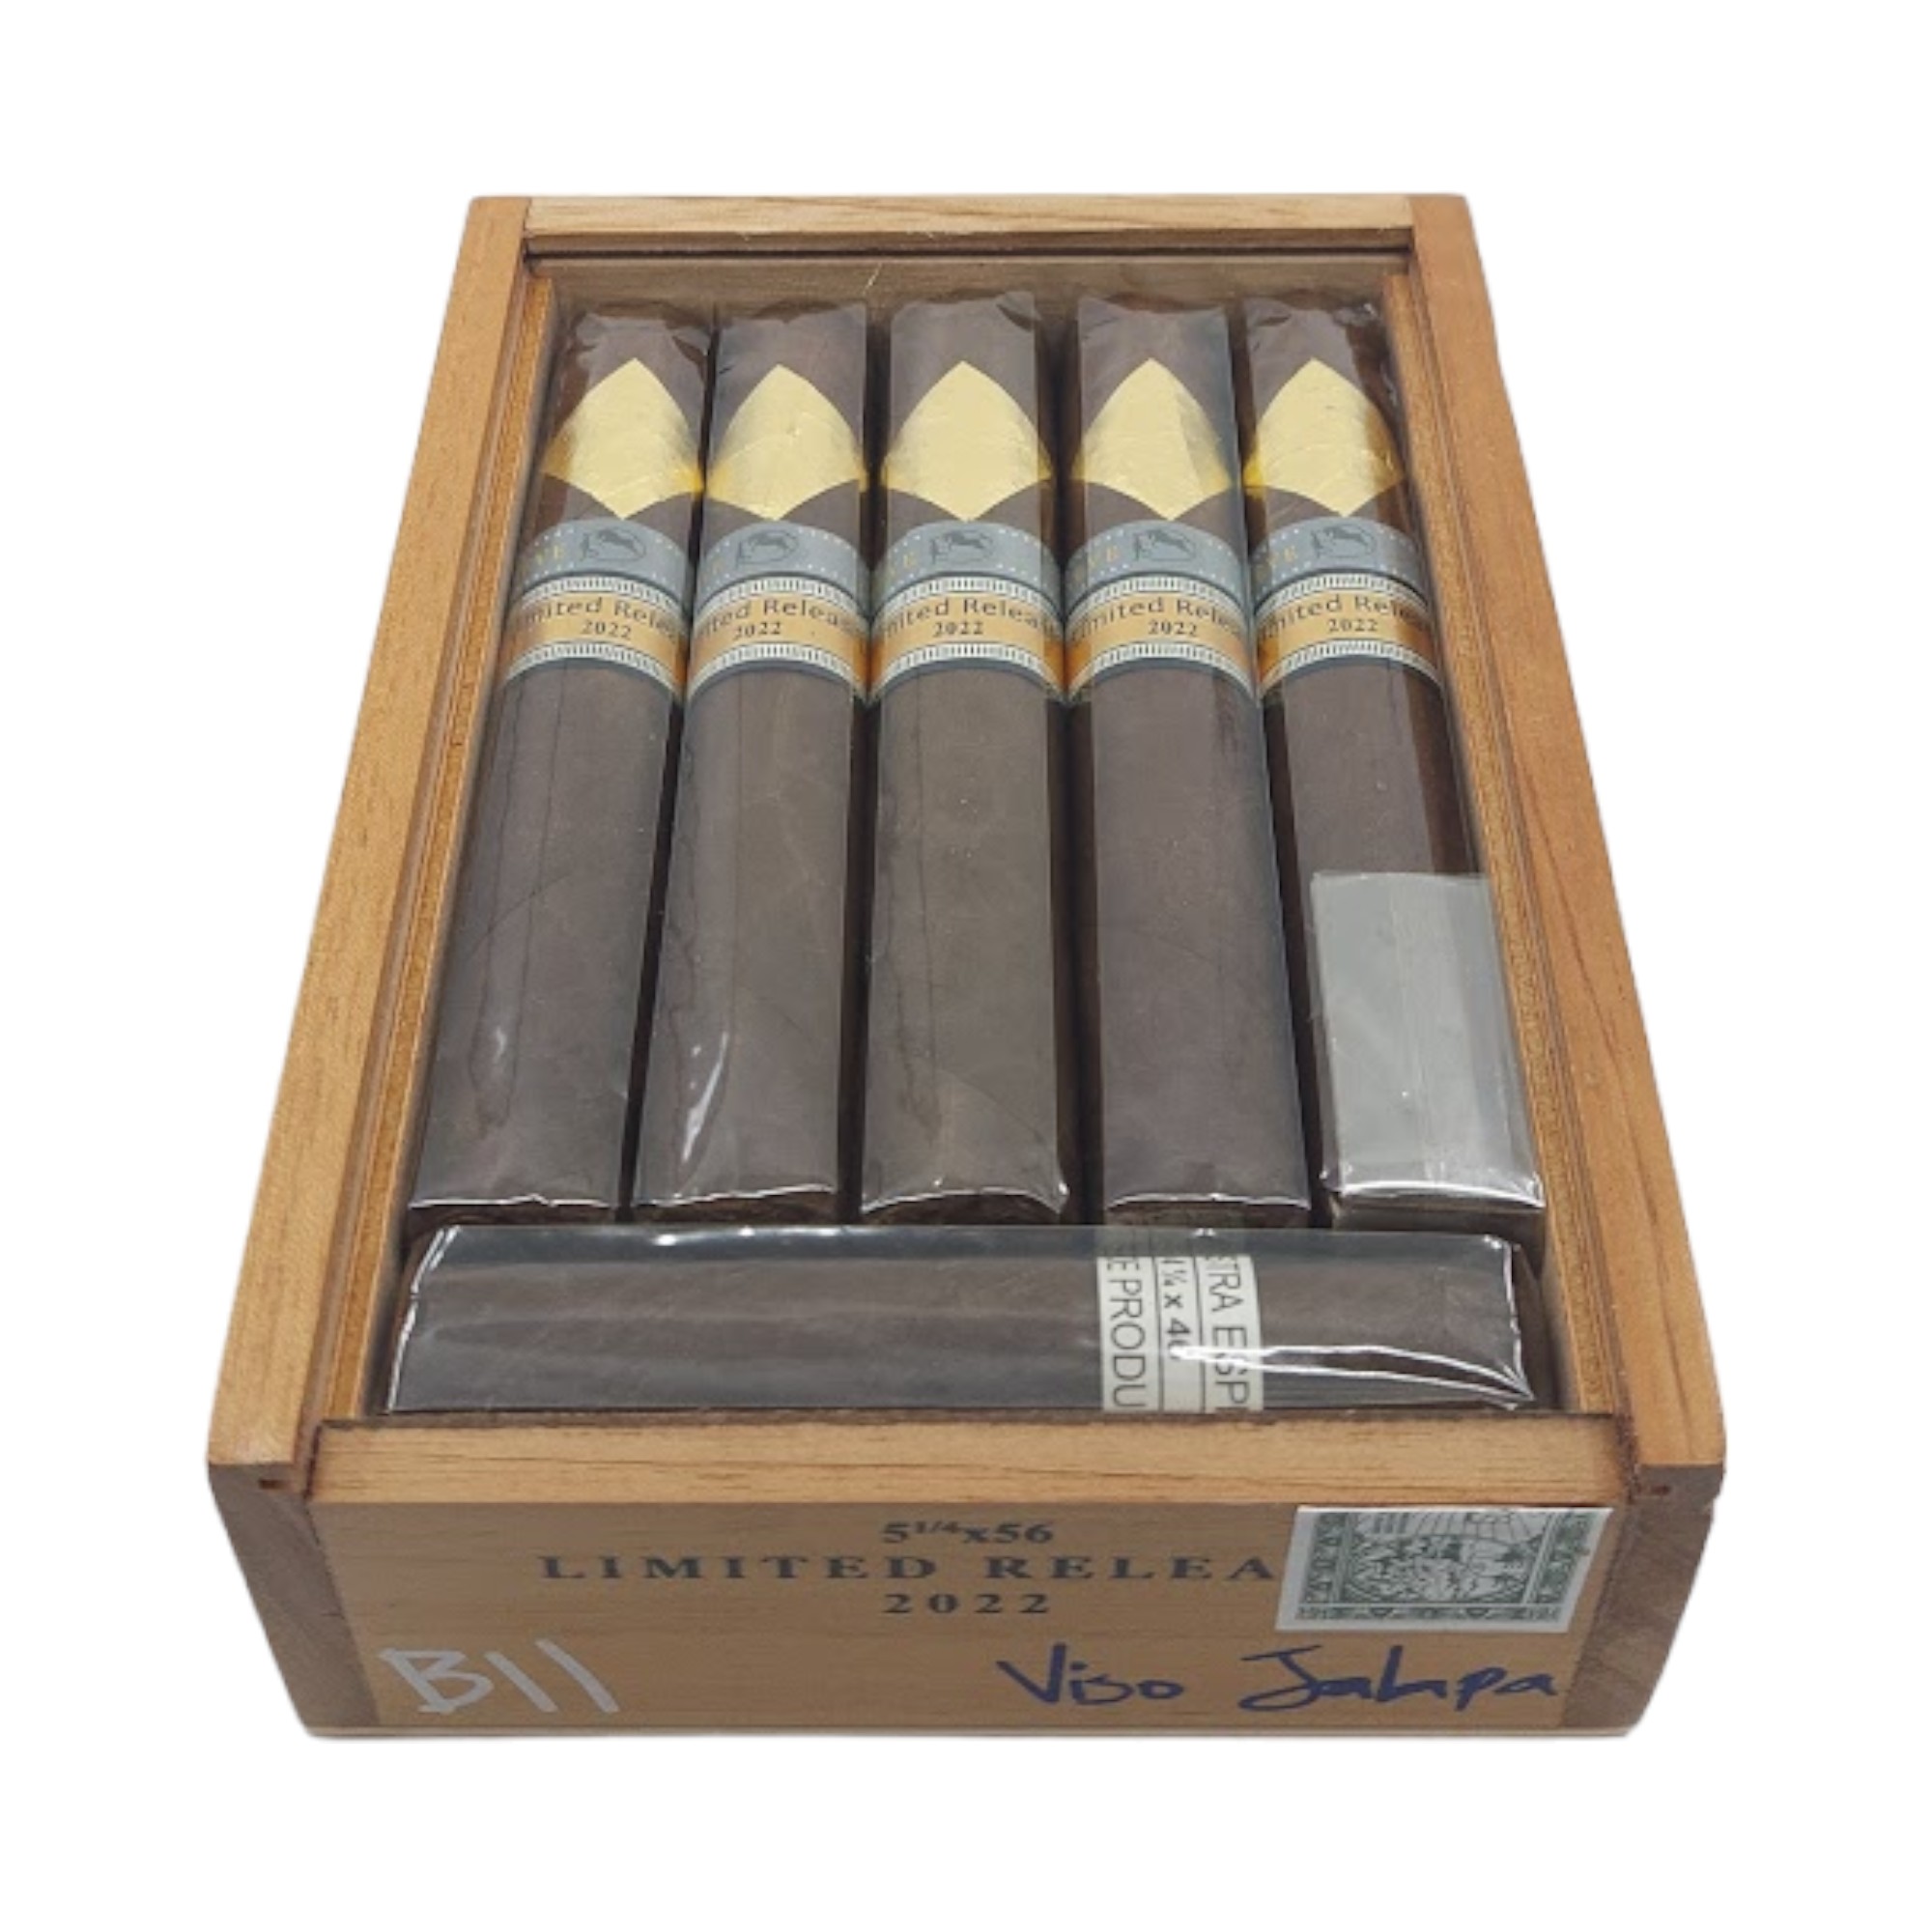 Bll Viso Jalapa Limited Release 2022 Box 11